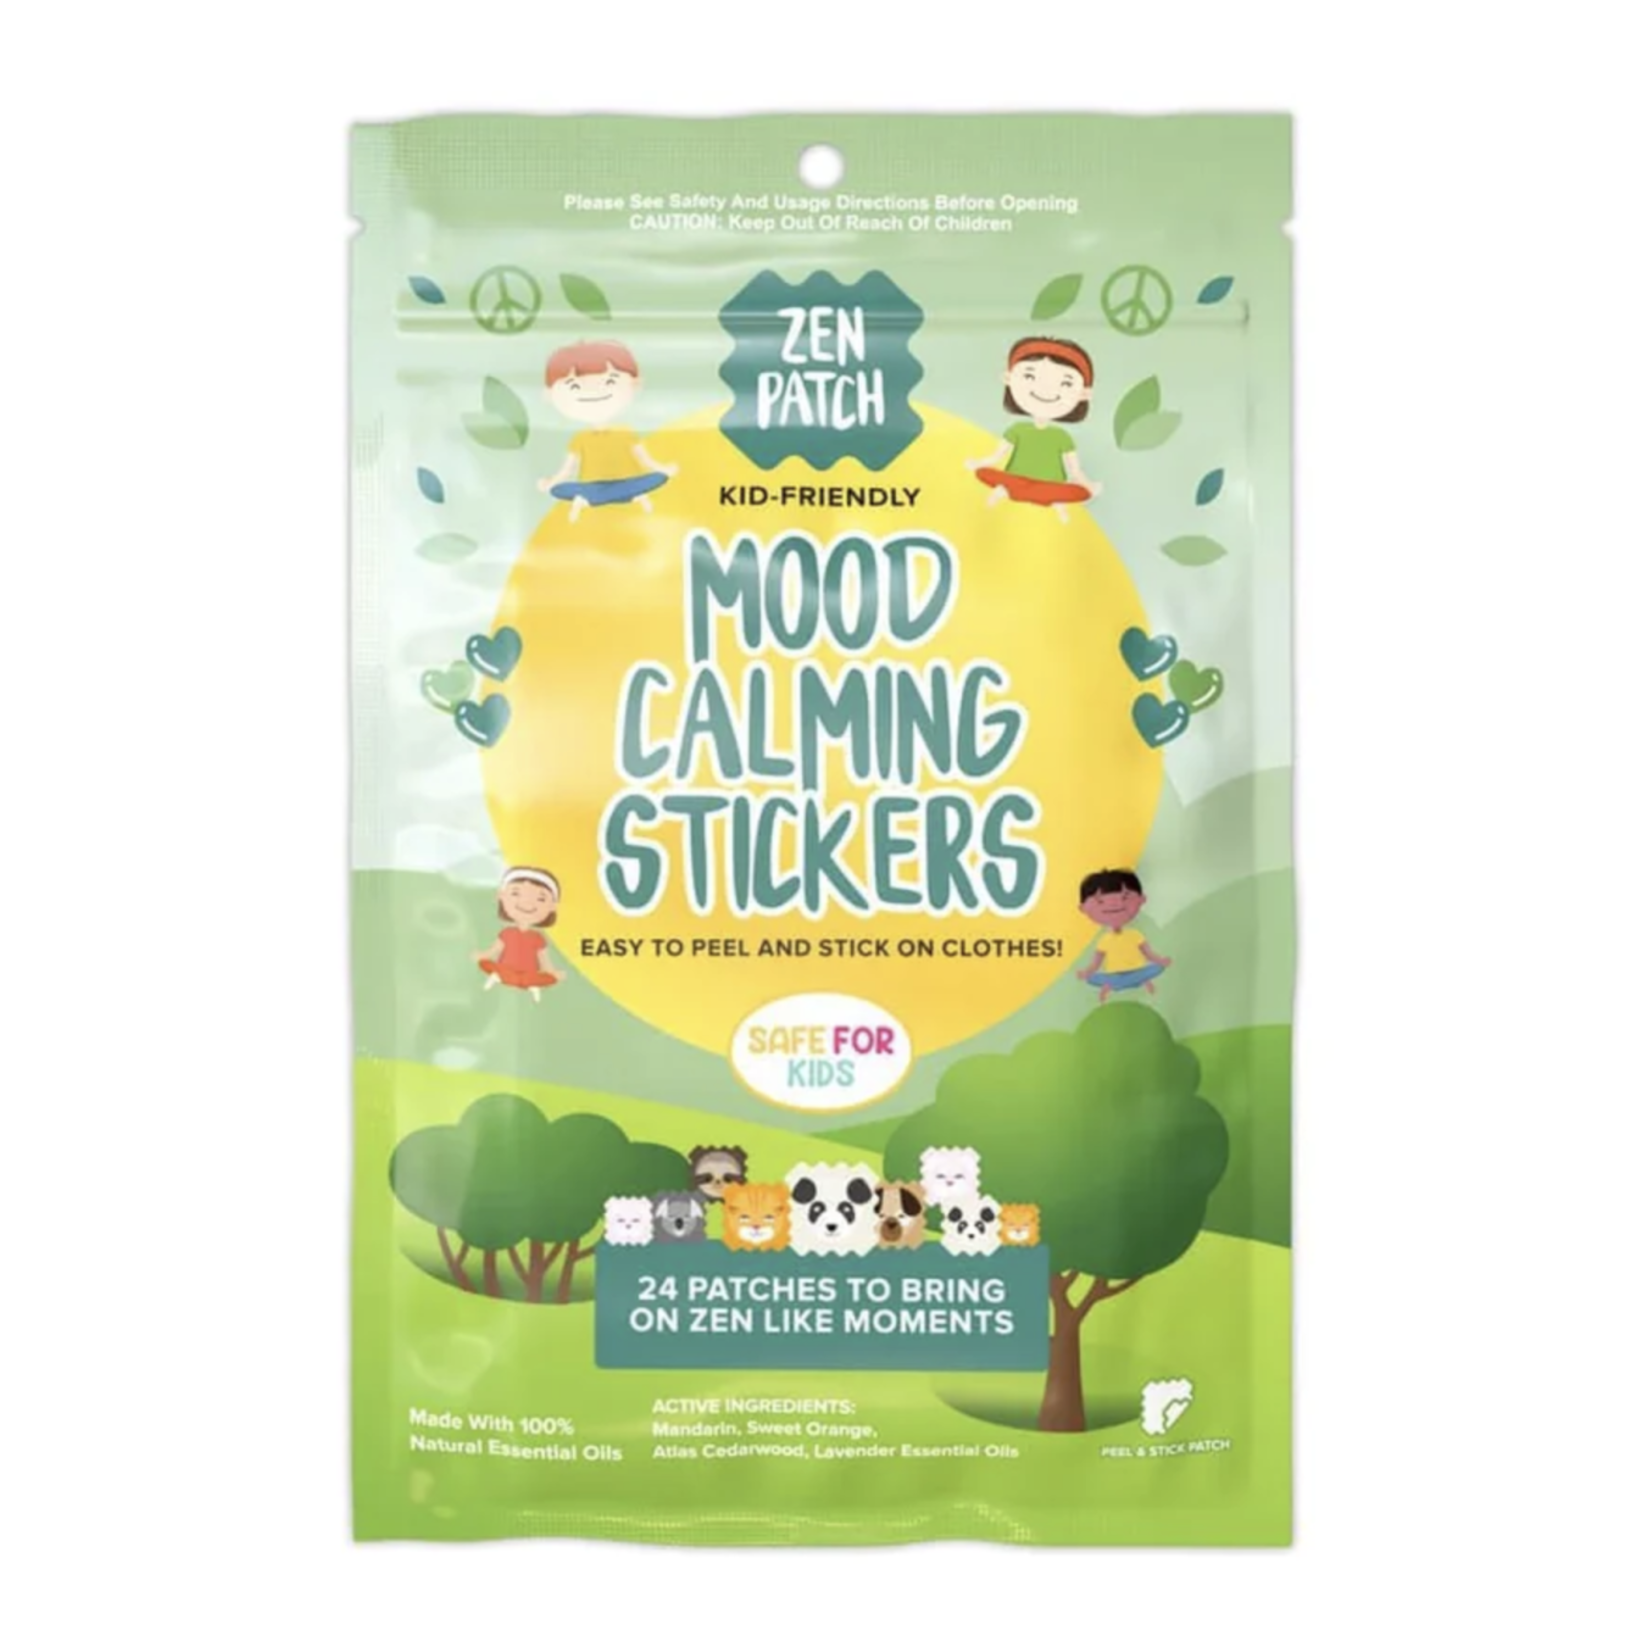 The Natural Patch Co Zen Patch - Mood Calming Stickers